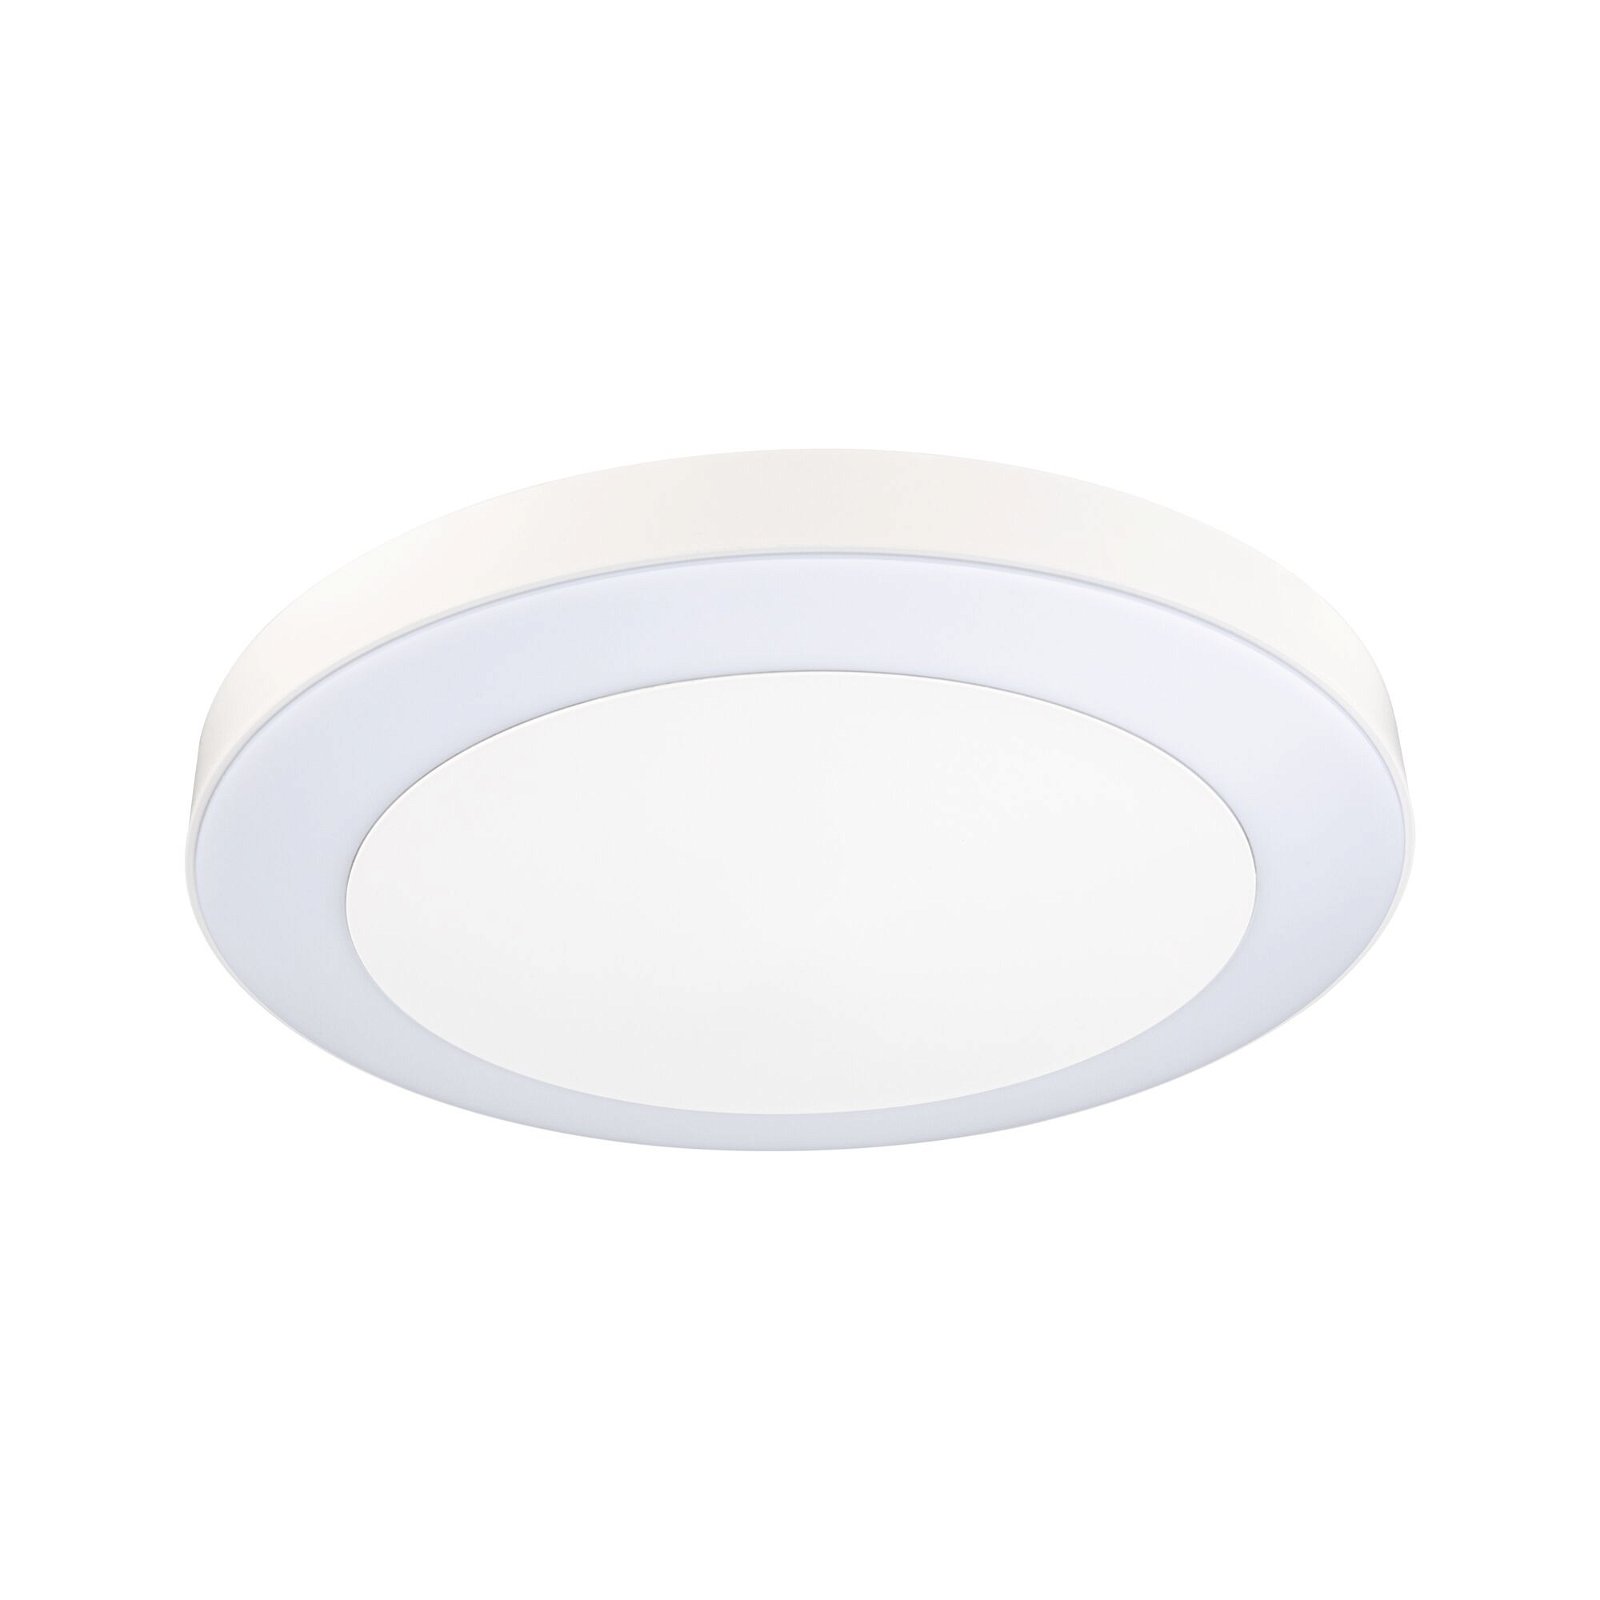 LED Ceiling luminaire Smart Home Zigbee Circula Dusk sensor insect-friendly IP44 round 320mm Tunable Warm 14W 880lm 230V White Plastic